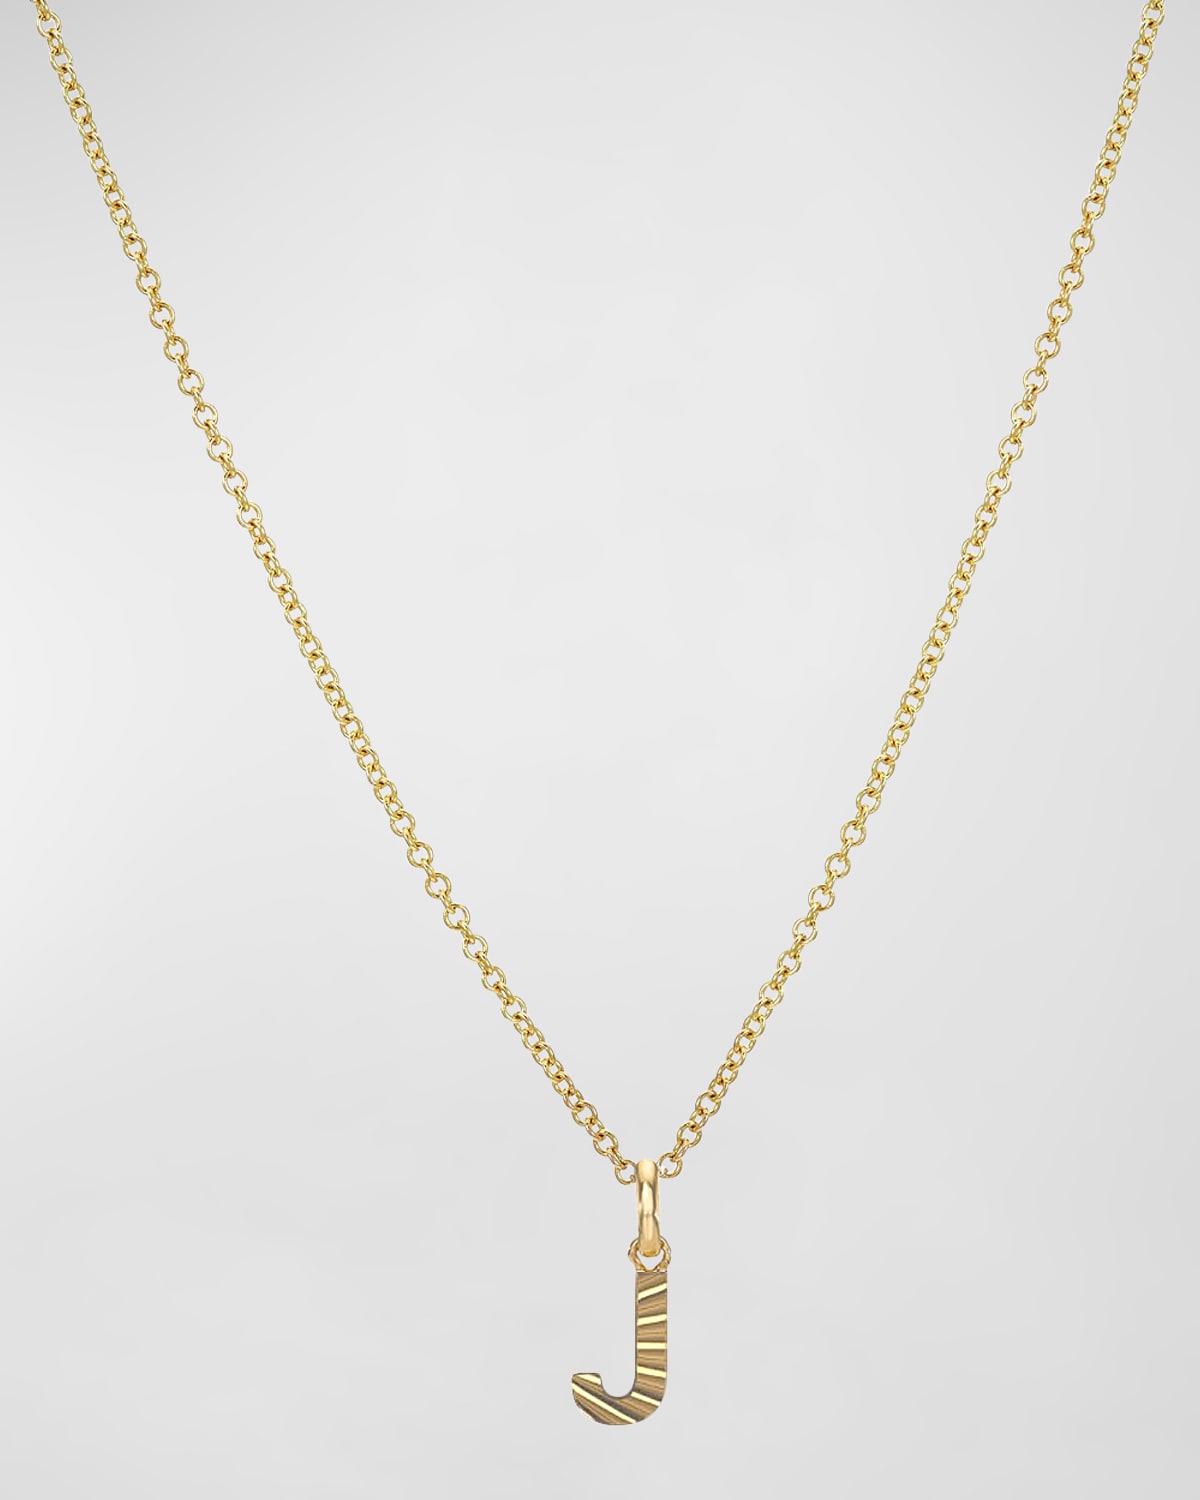 Zoe Lev Jewelry 14k Gold Initial Pendant Necklace In J